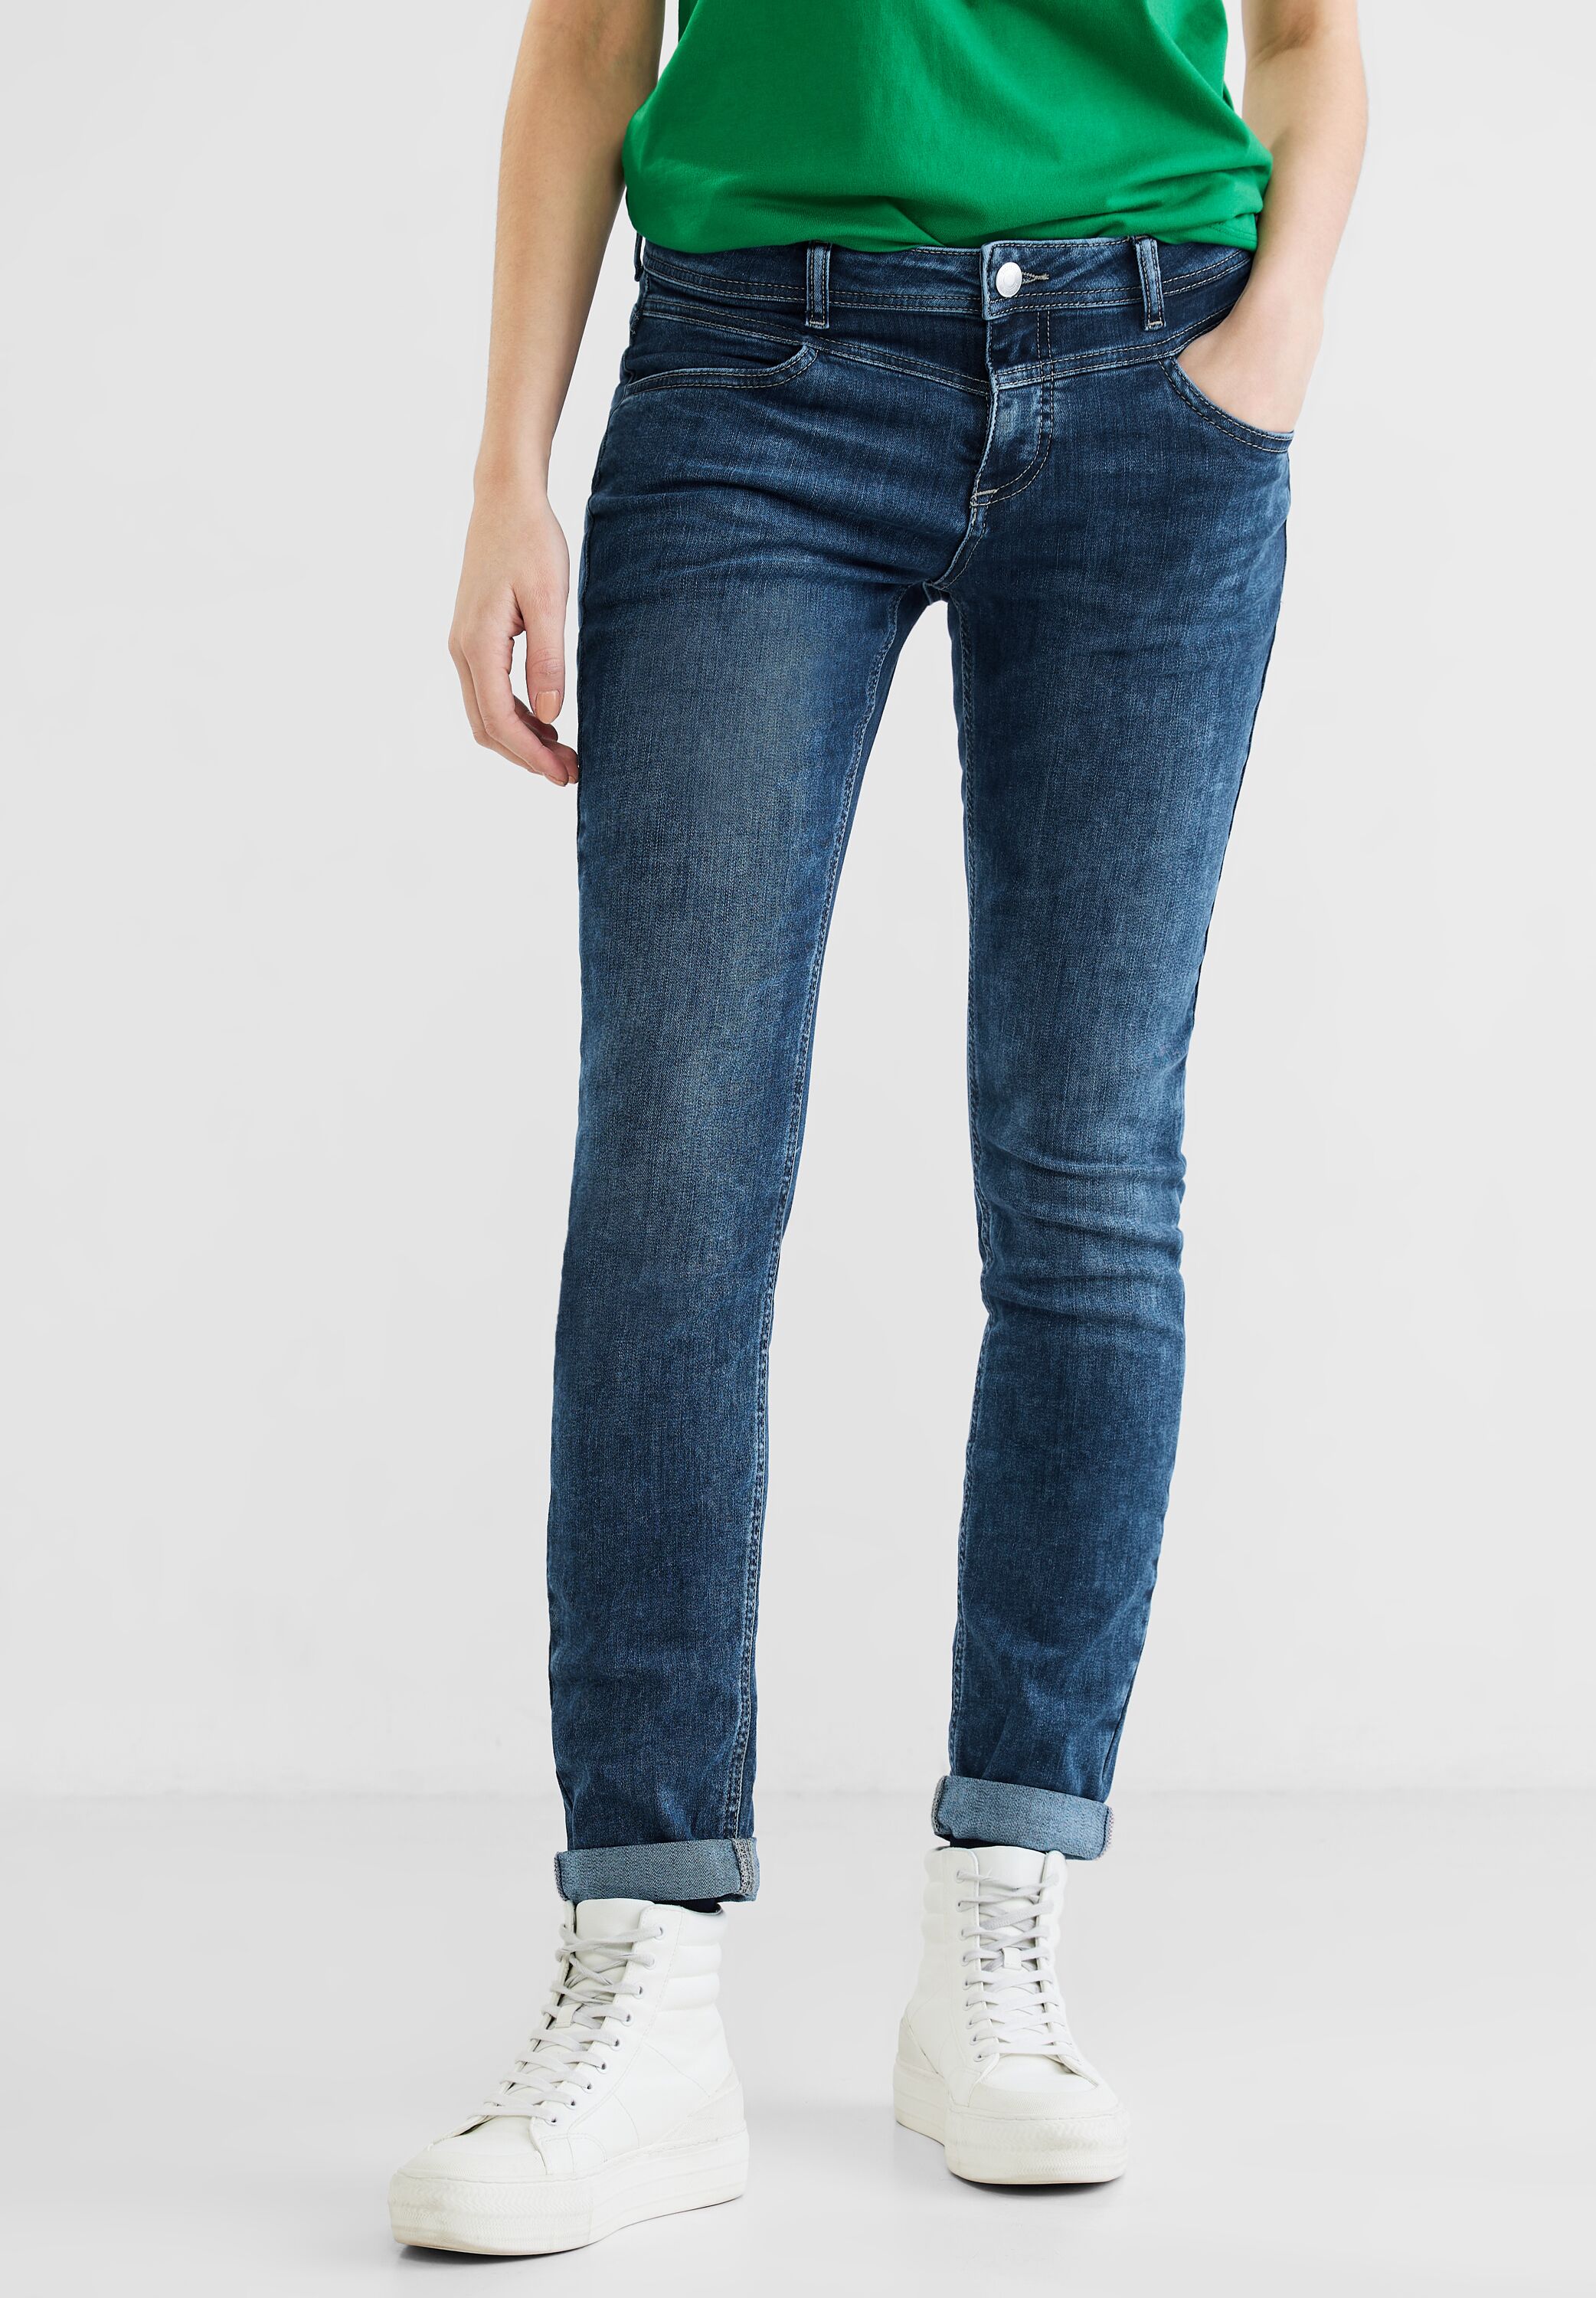 Indigo - in Street One CONCEPT Deep Wash Used A376060-14821-32 Mode Jane Jeans